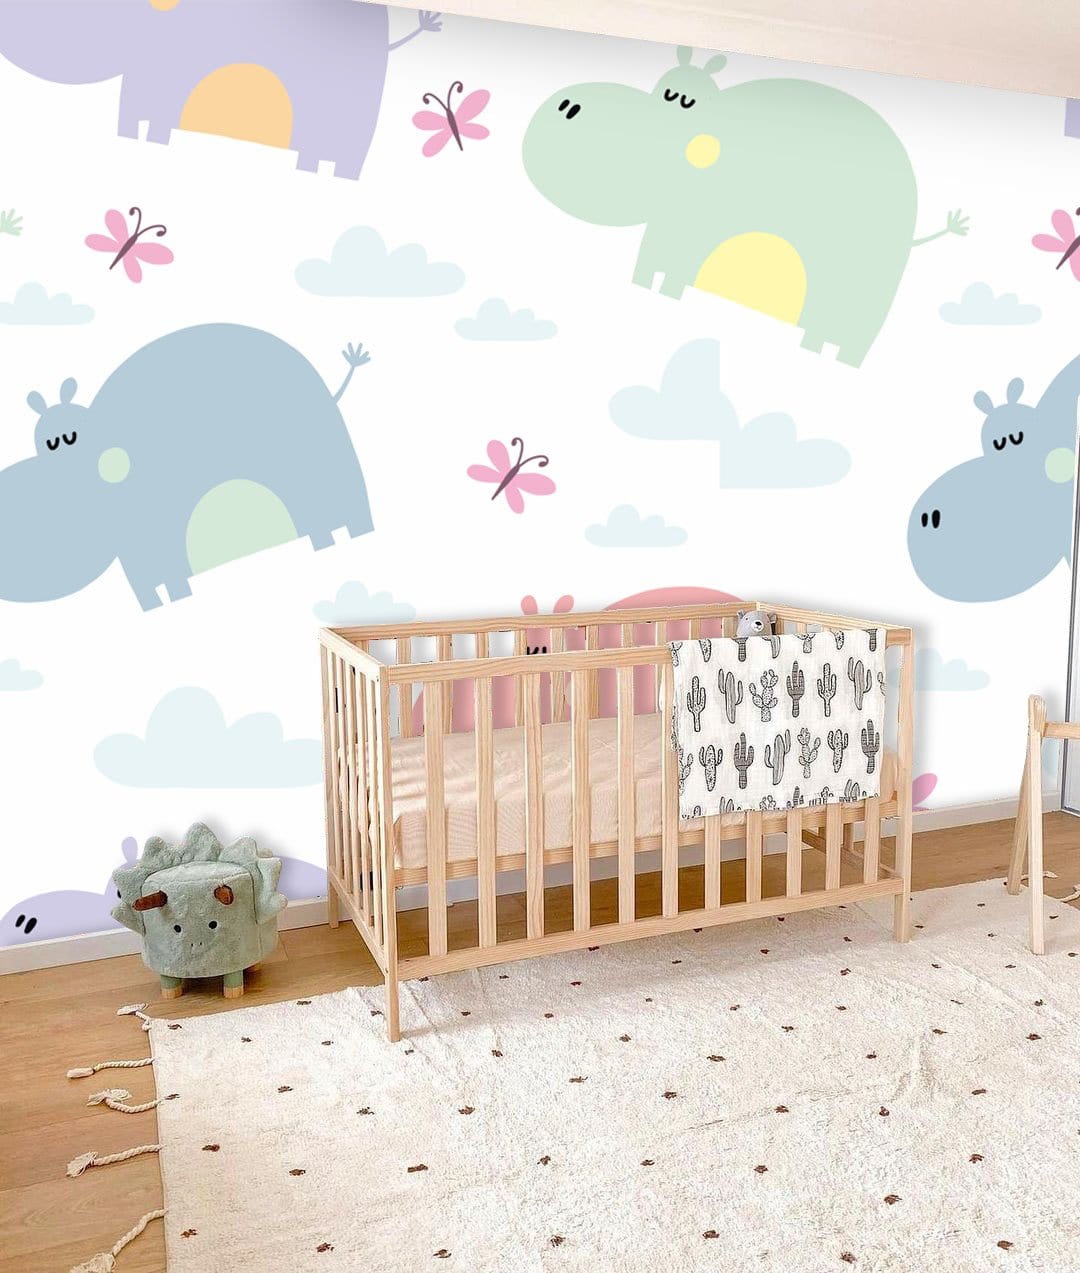 Wallpaper with Soft-Touch Illustrations of Animals, Suitable for a Child's Room